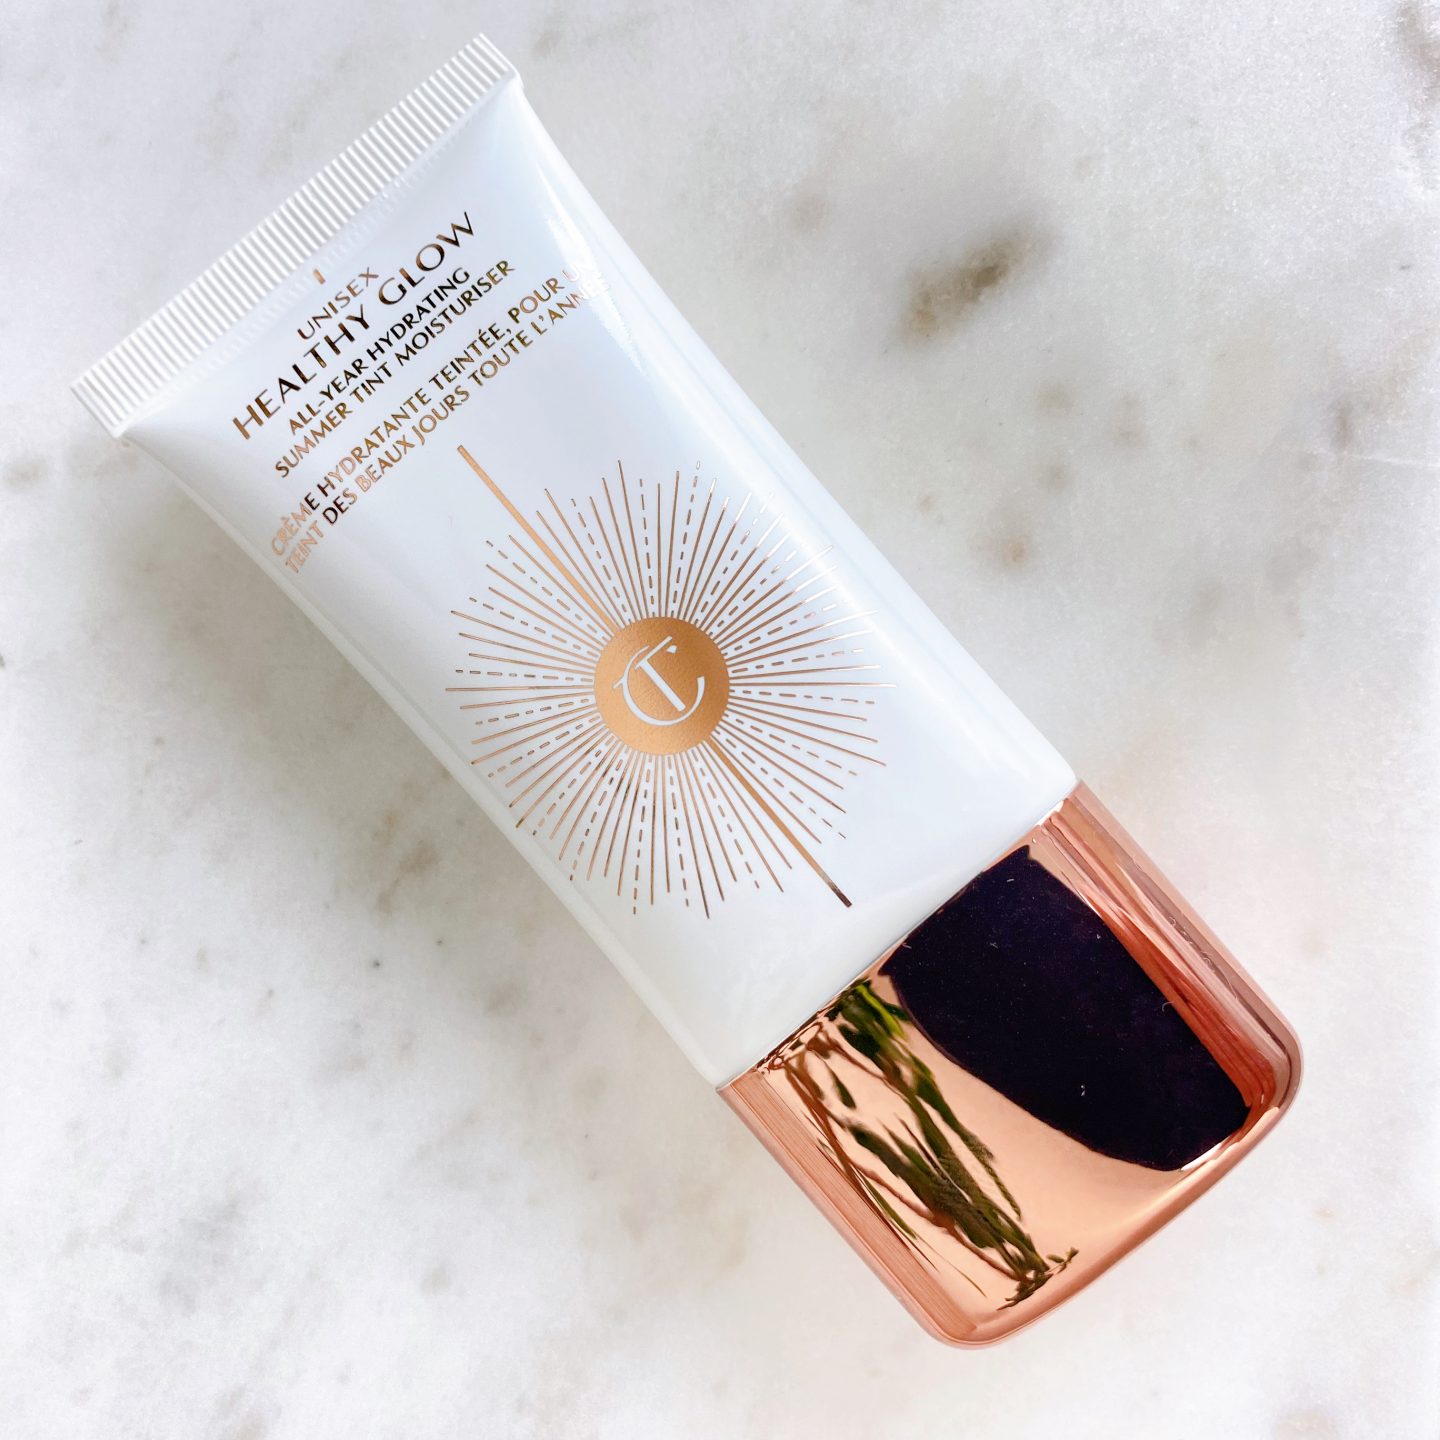 Charlotte Tilbury Unisex Healthy Glow Review